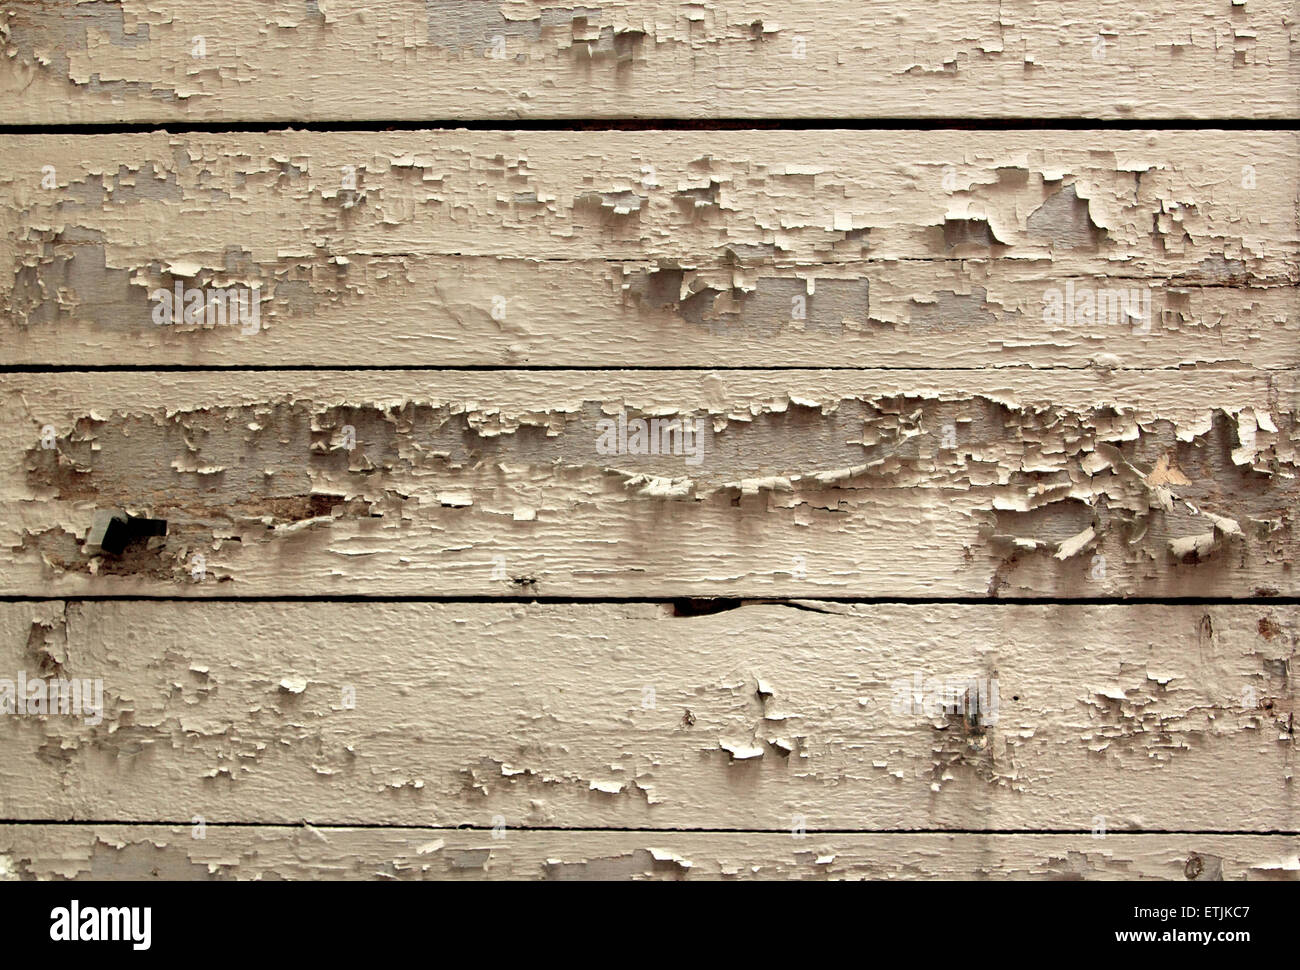 Paint Peeling Off Wooden Ceiling Stock Photo 84003591 Alamy